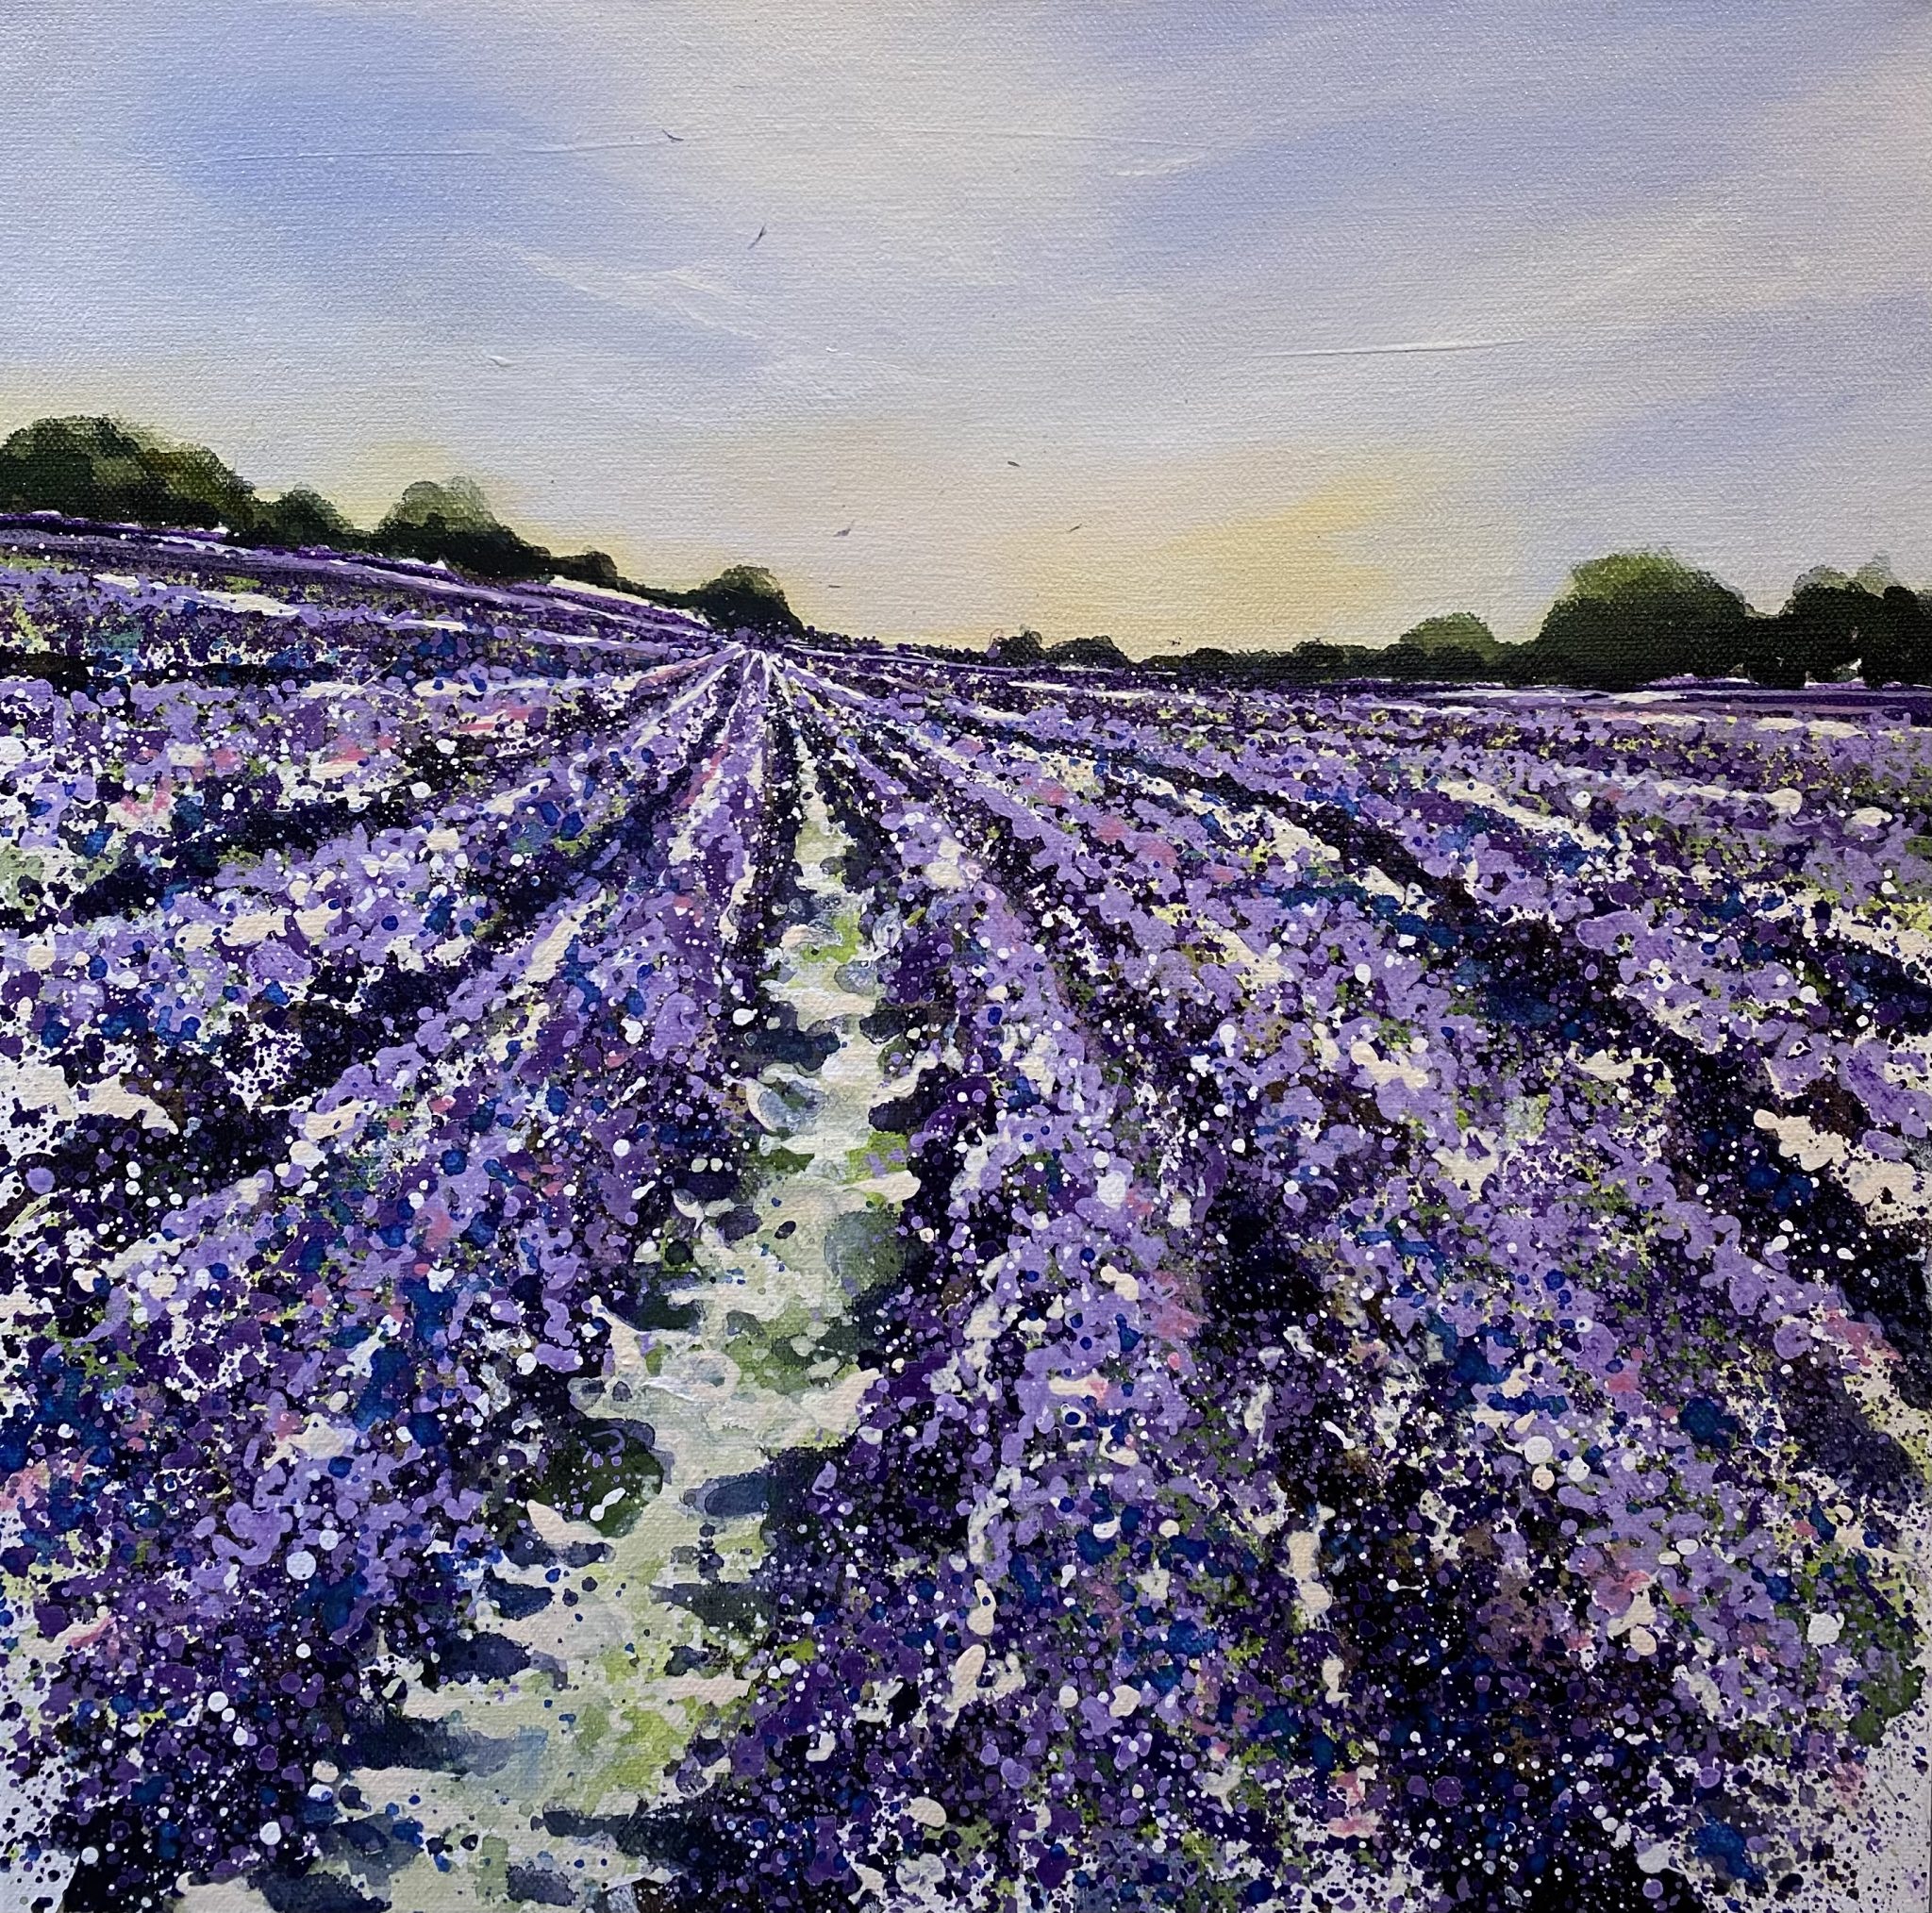 Cotswold Lavender is an original painting by the talented artist Adele Riley